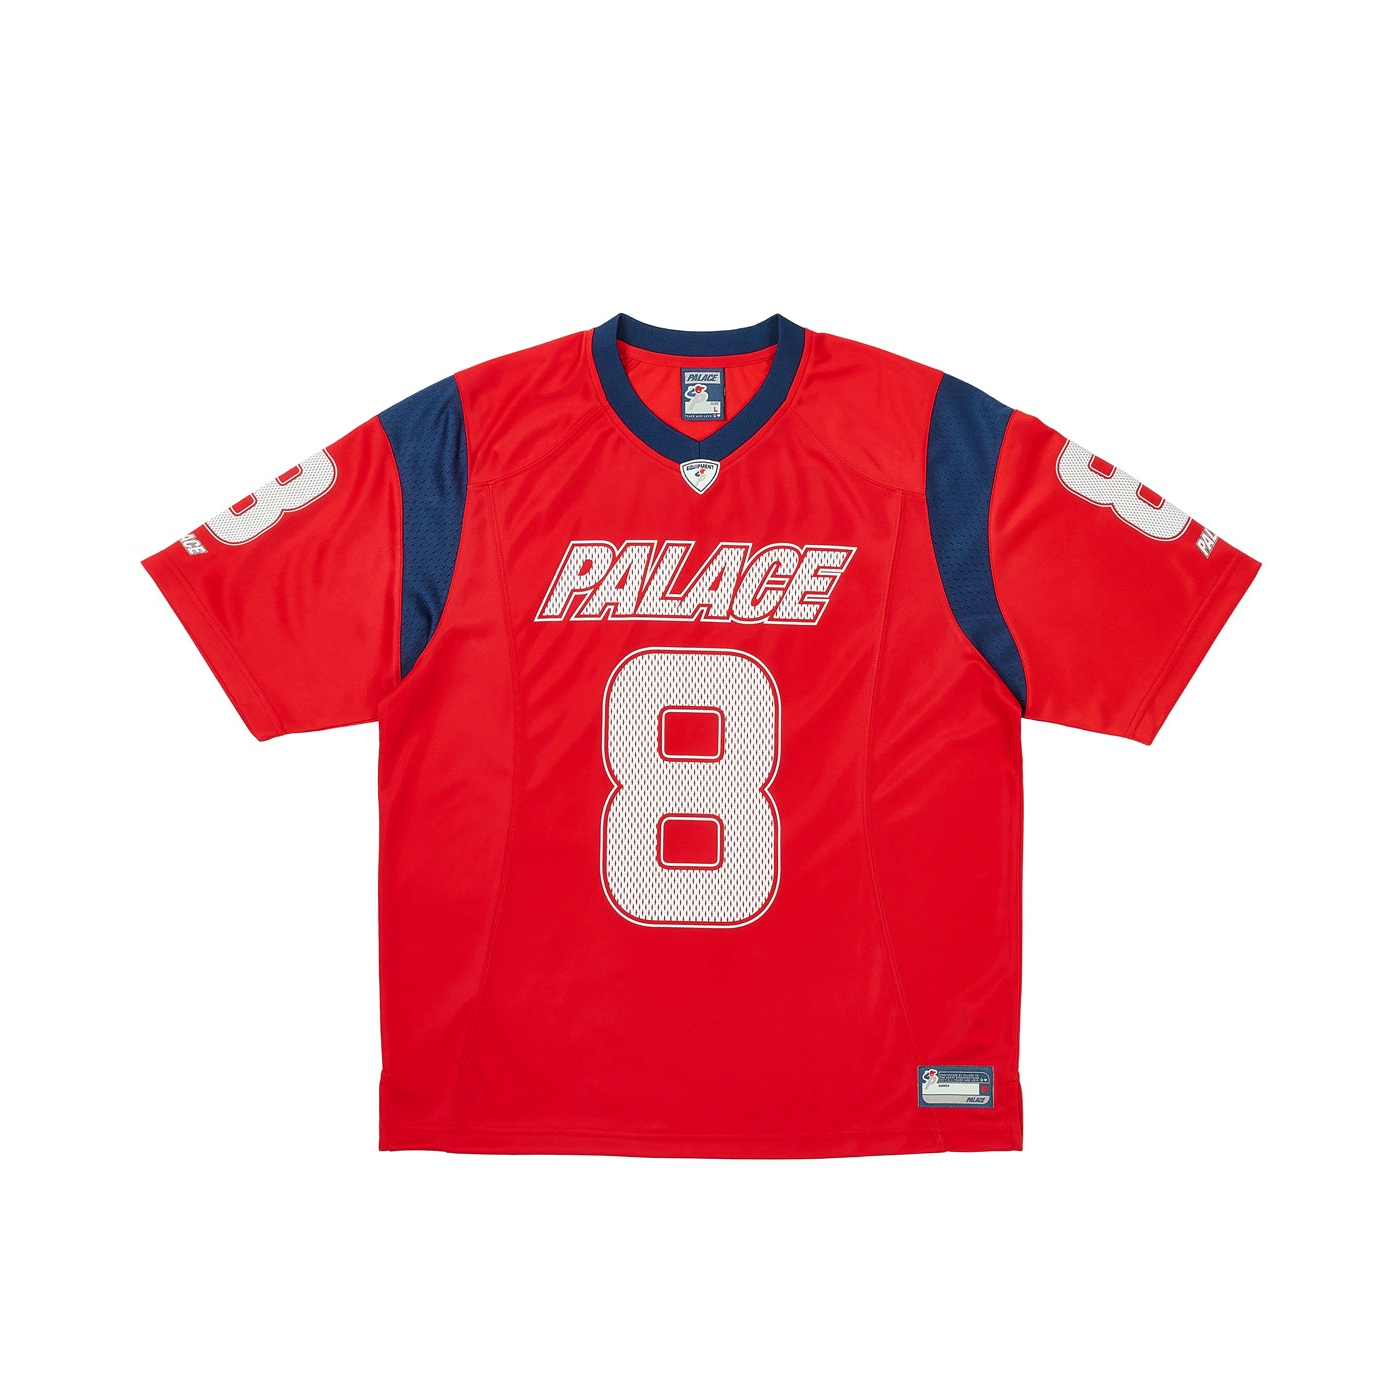 Thumbnail MESH TEAM JERSEY RED one color